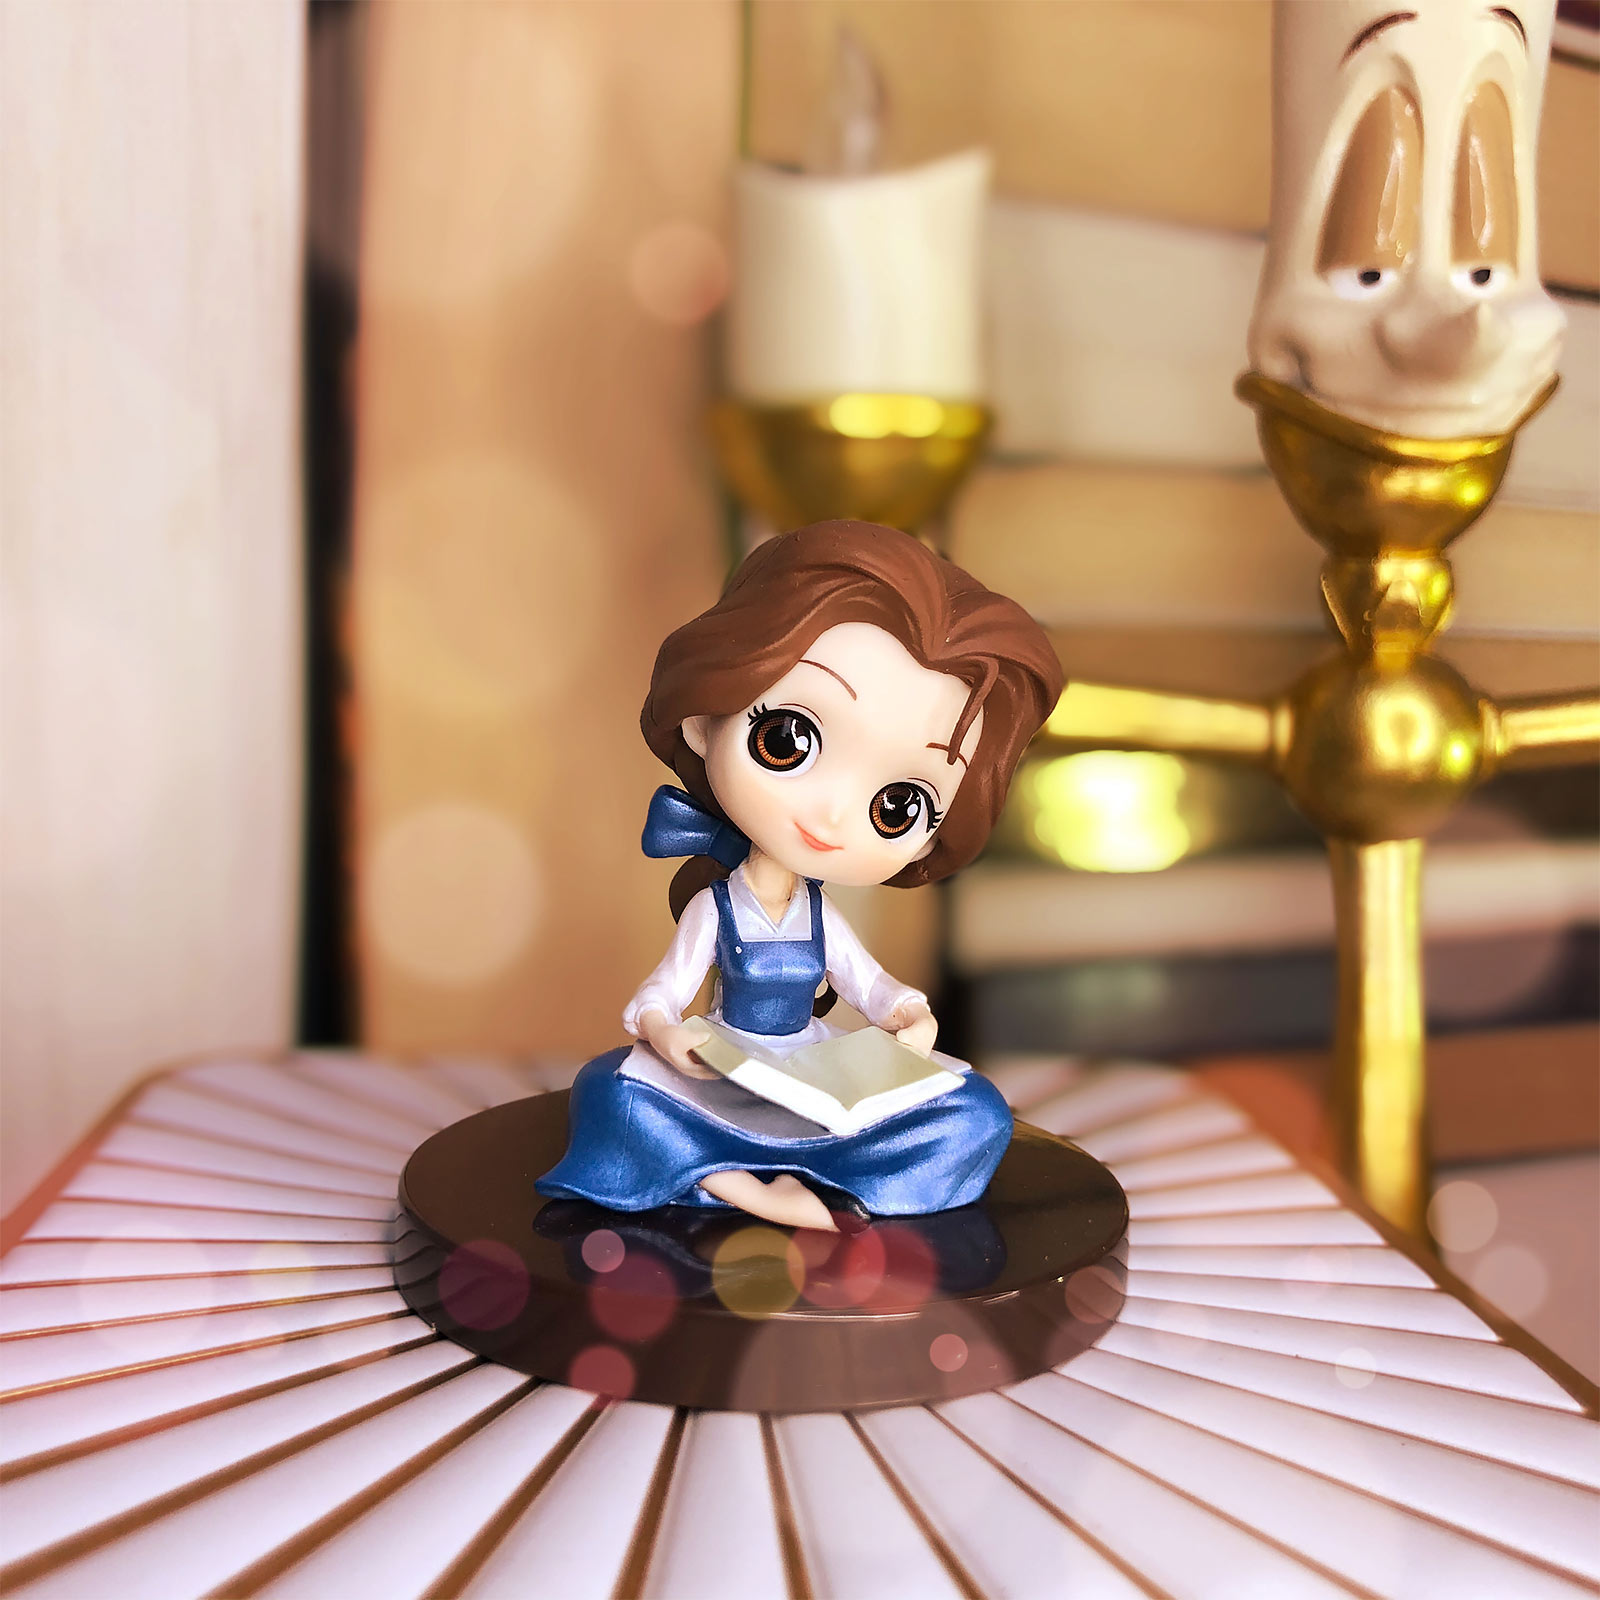 Beauty and the Beast - Belle Q Posket Figure 5 cm